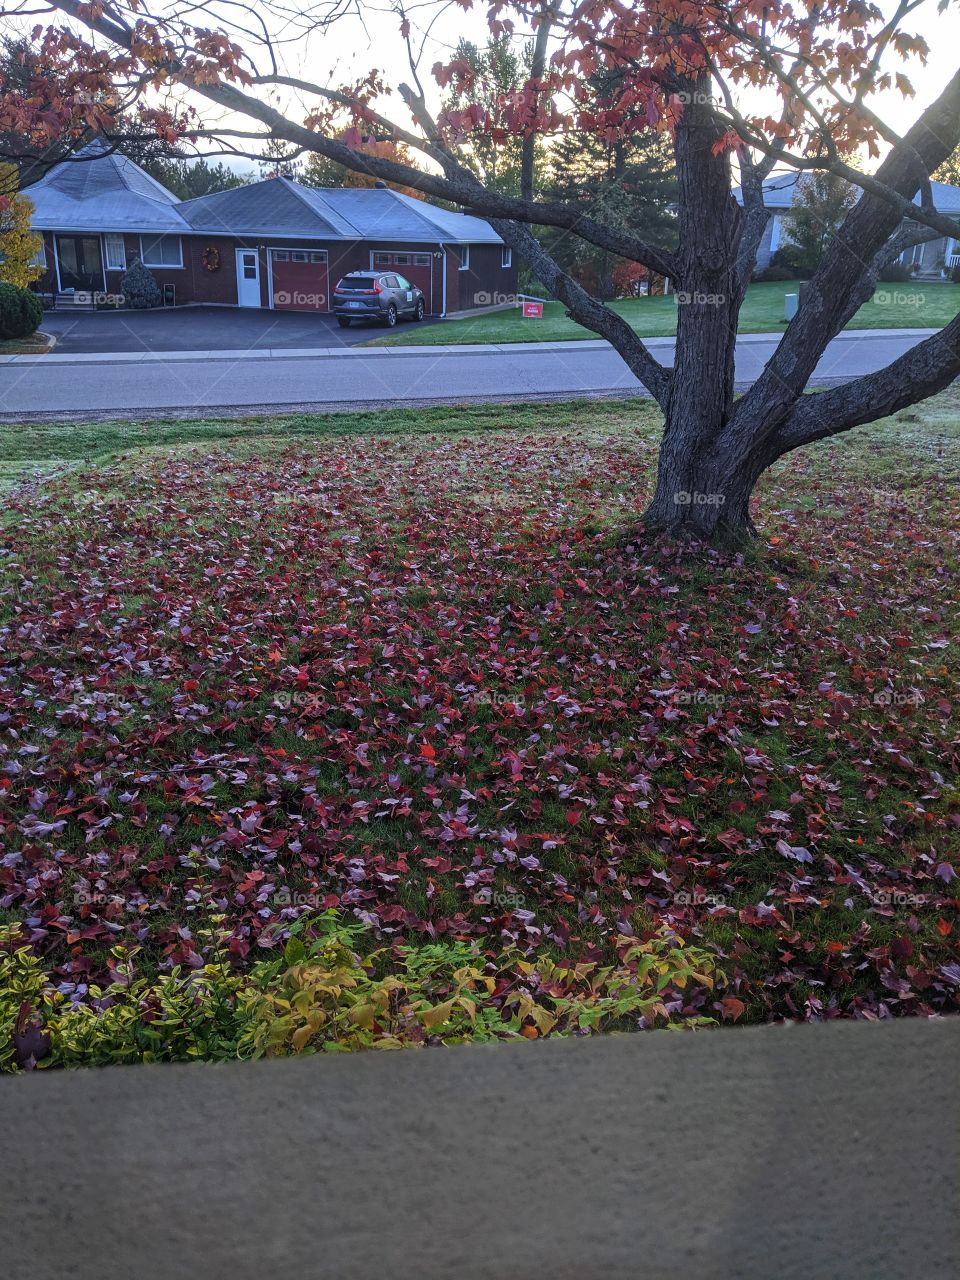 look at the beautiful colour of those leaves on the lawn.